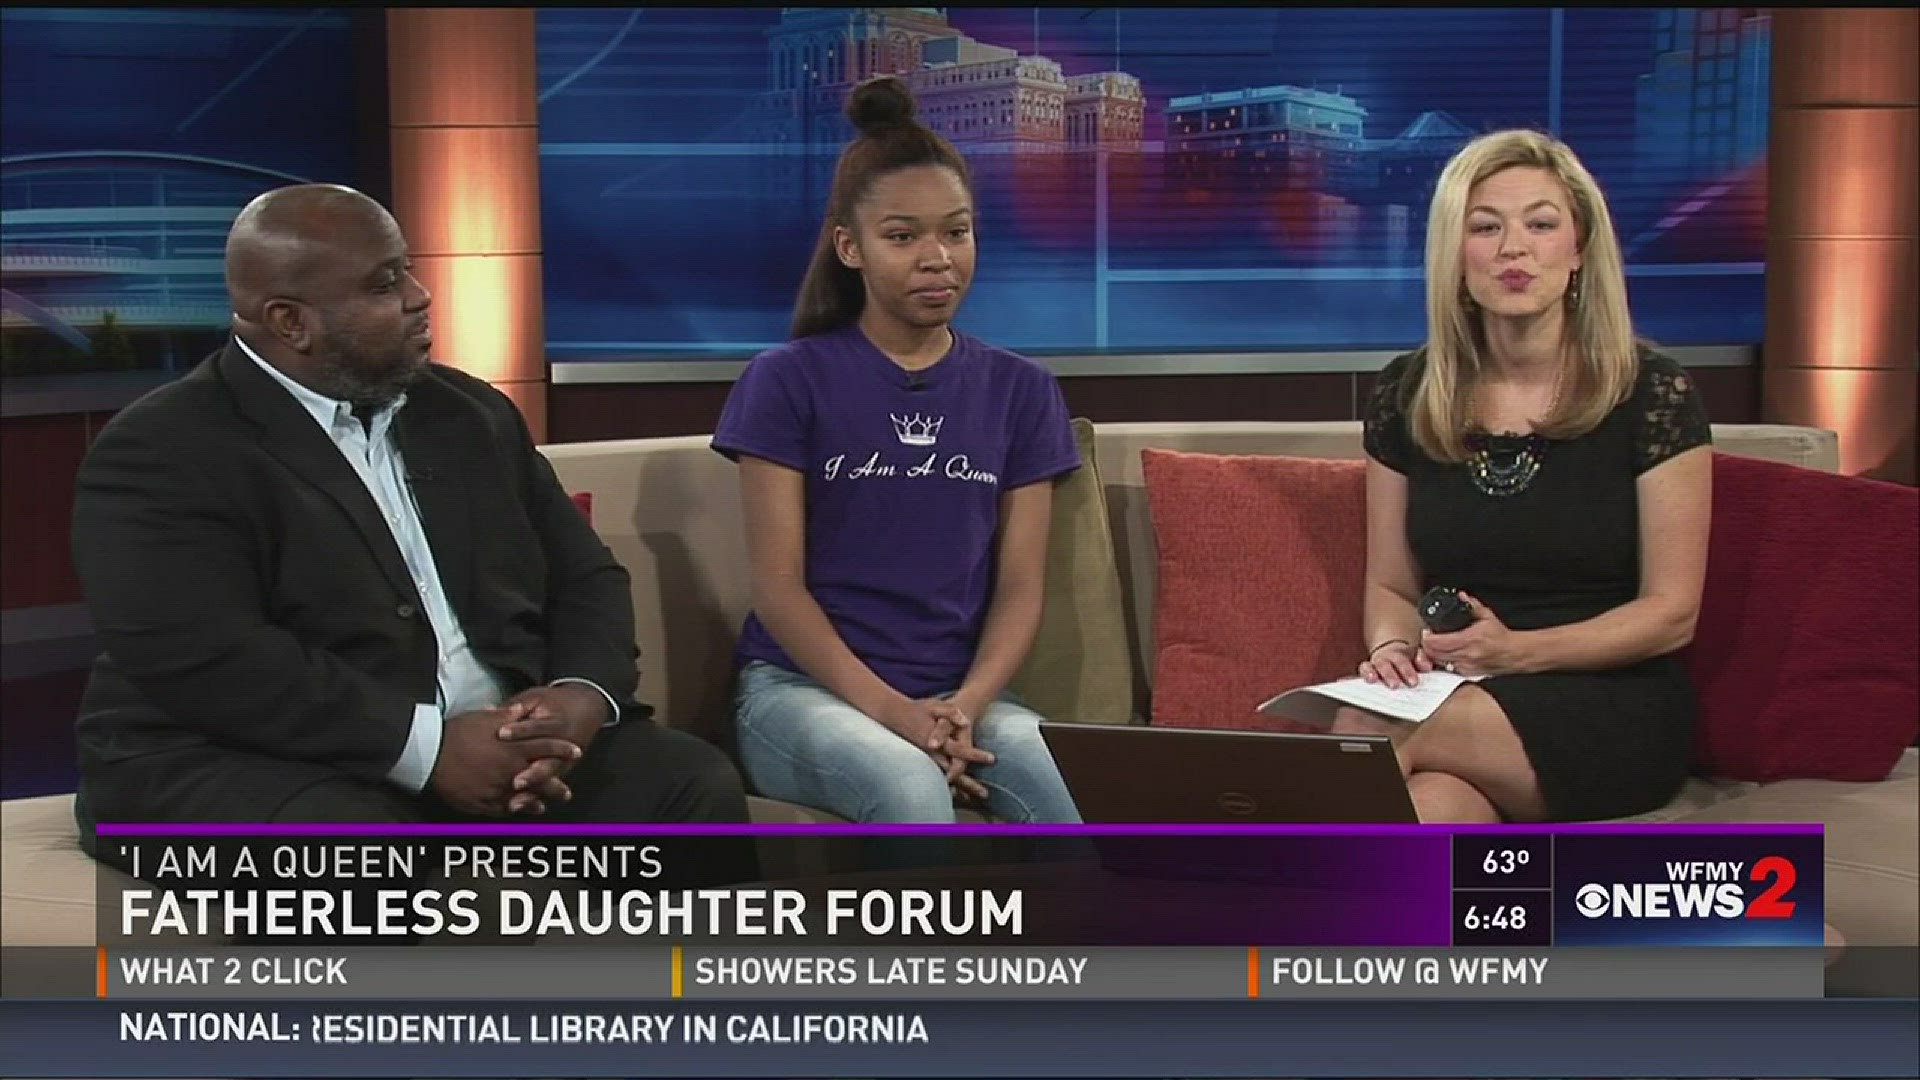 This Weekend: The Fatherless Daughter Community Forum